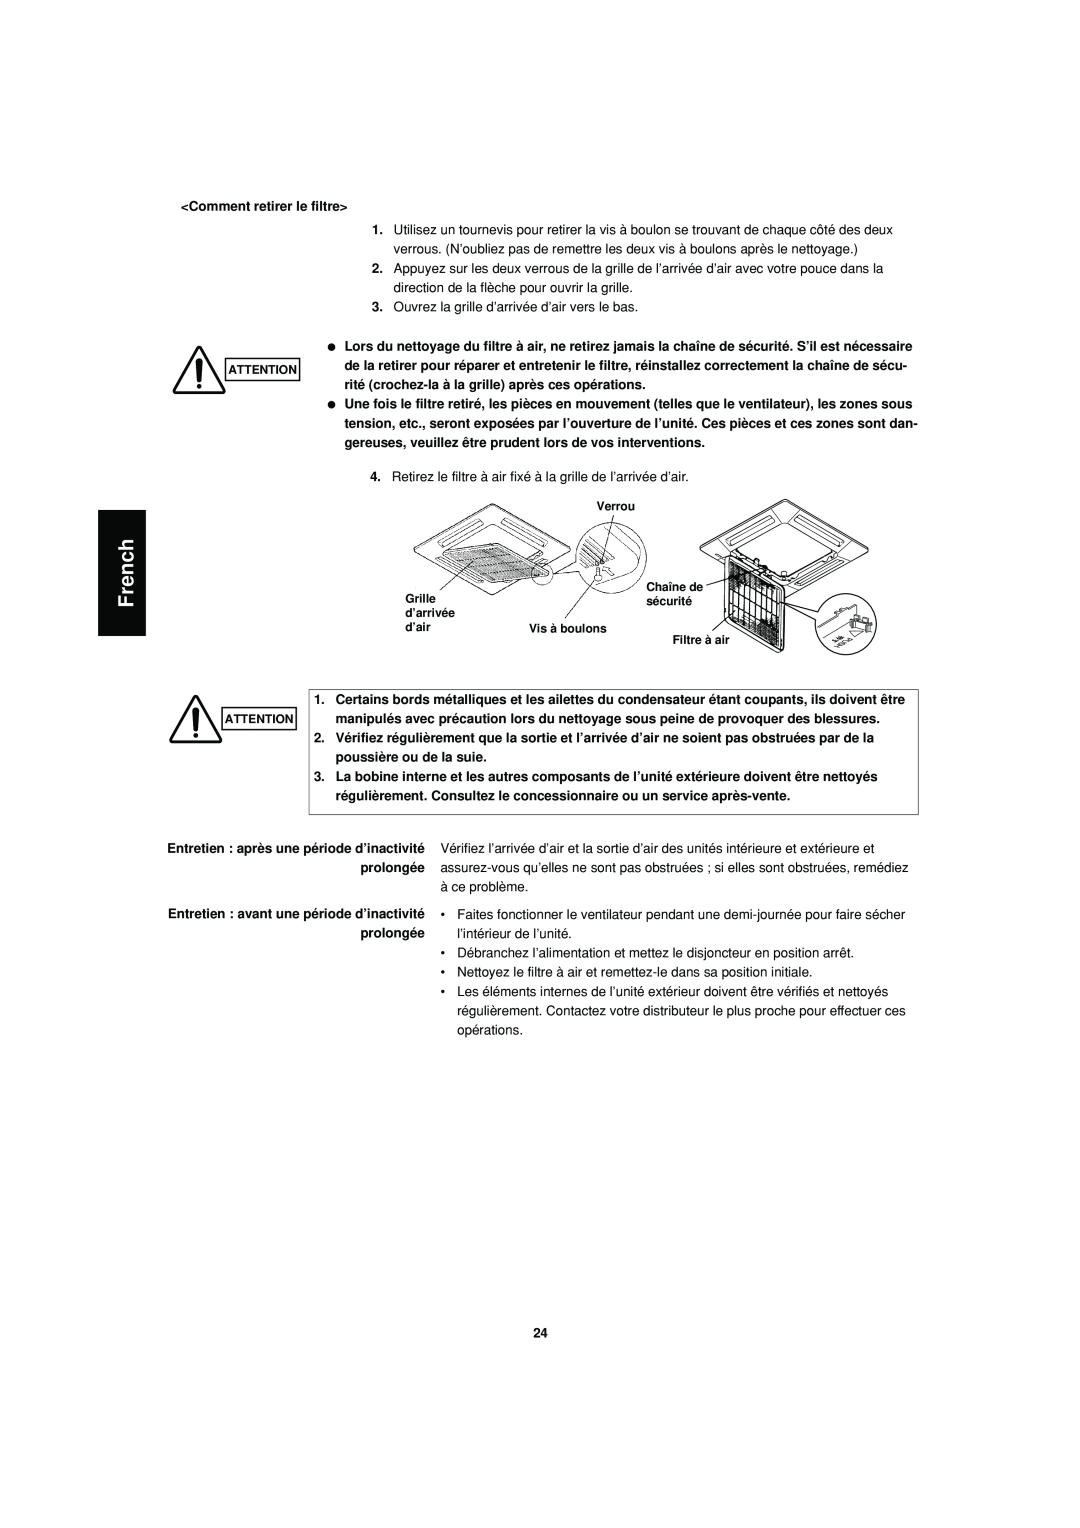 Sanyo SPW-XR254EH56 operation manual French, Comment retirer le filtre 